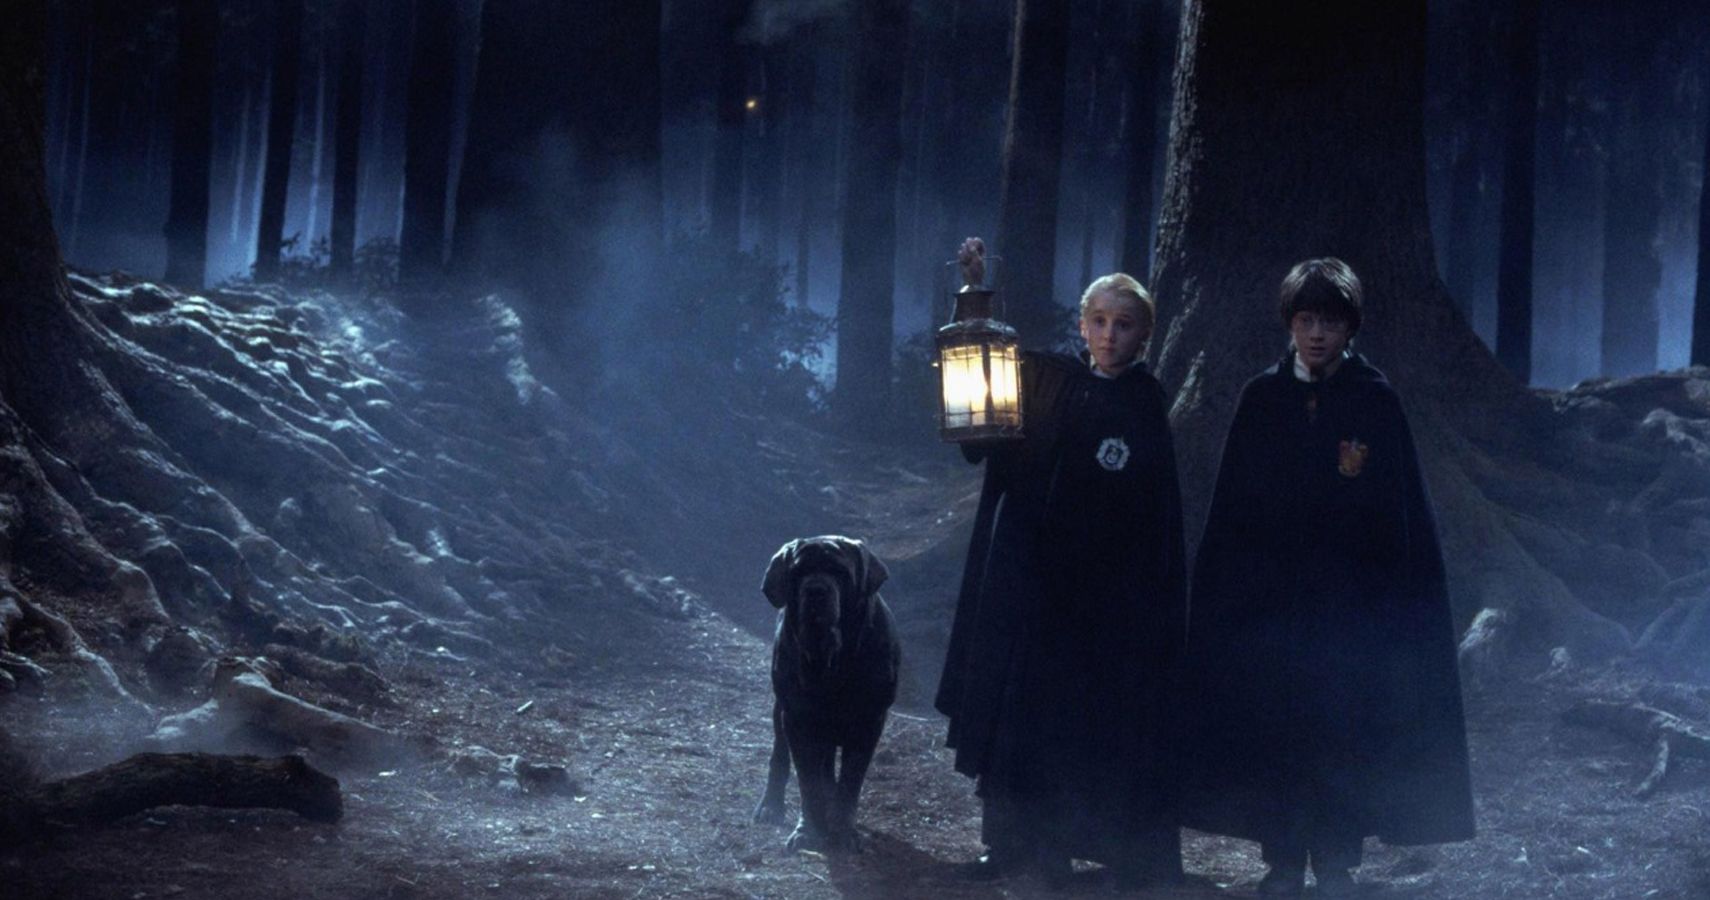 Harry Potter: 10 Things About the Forbidden Forest The Books Leave Out